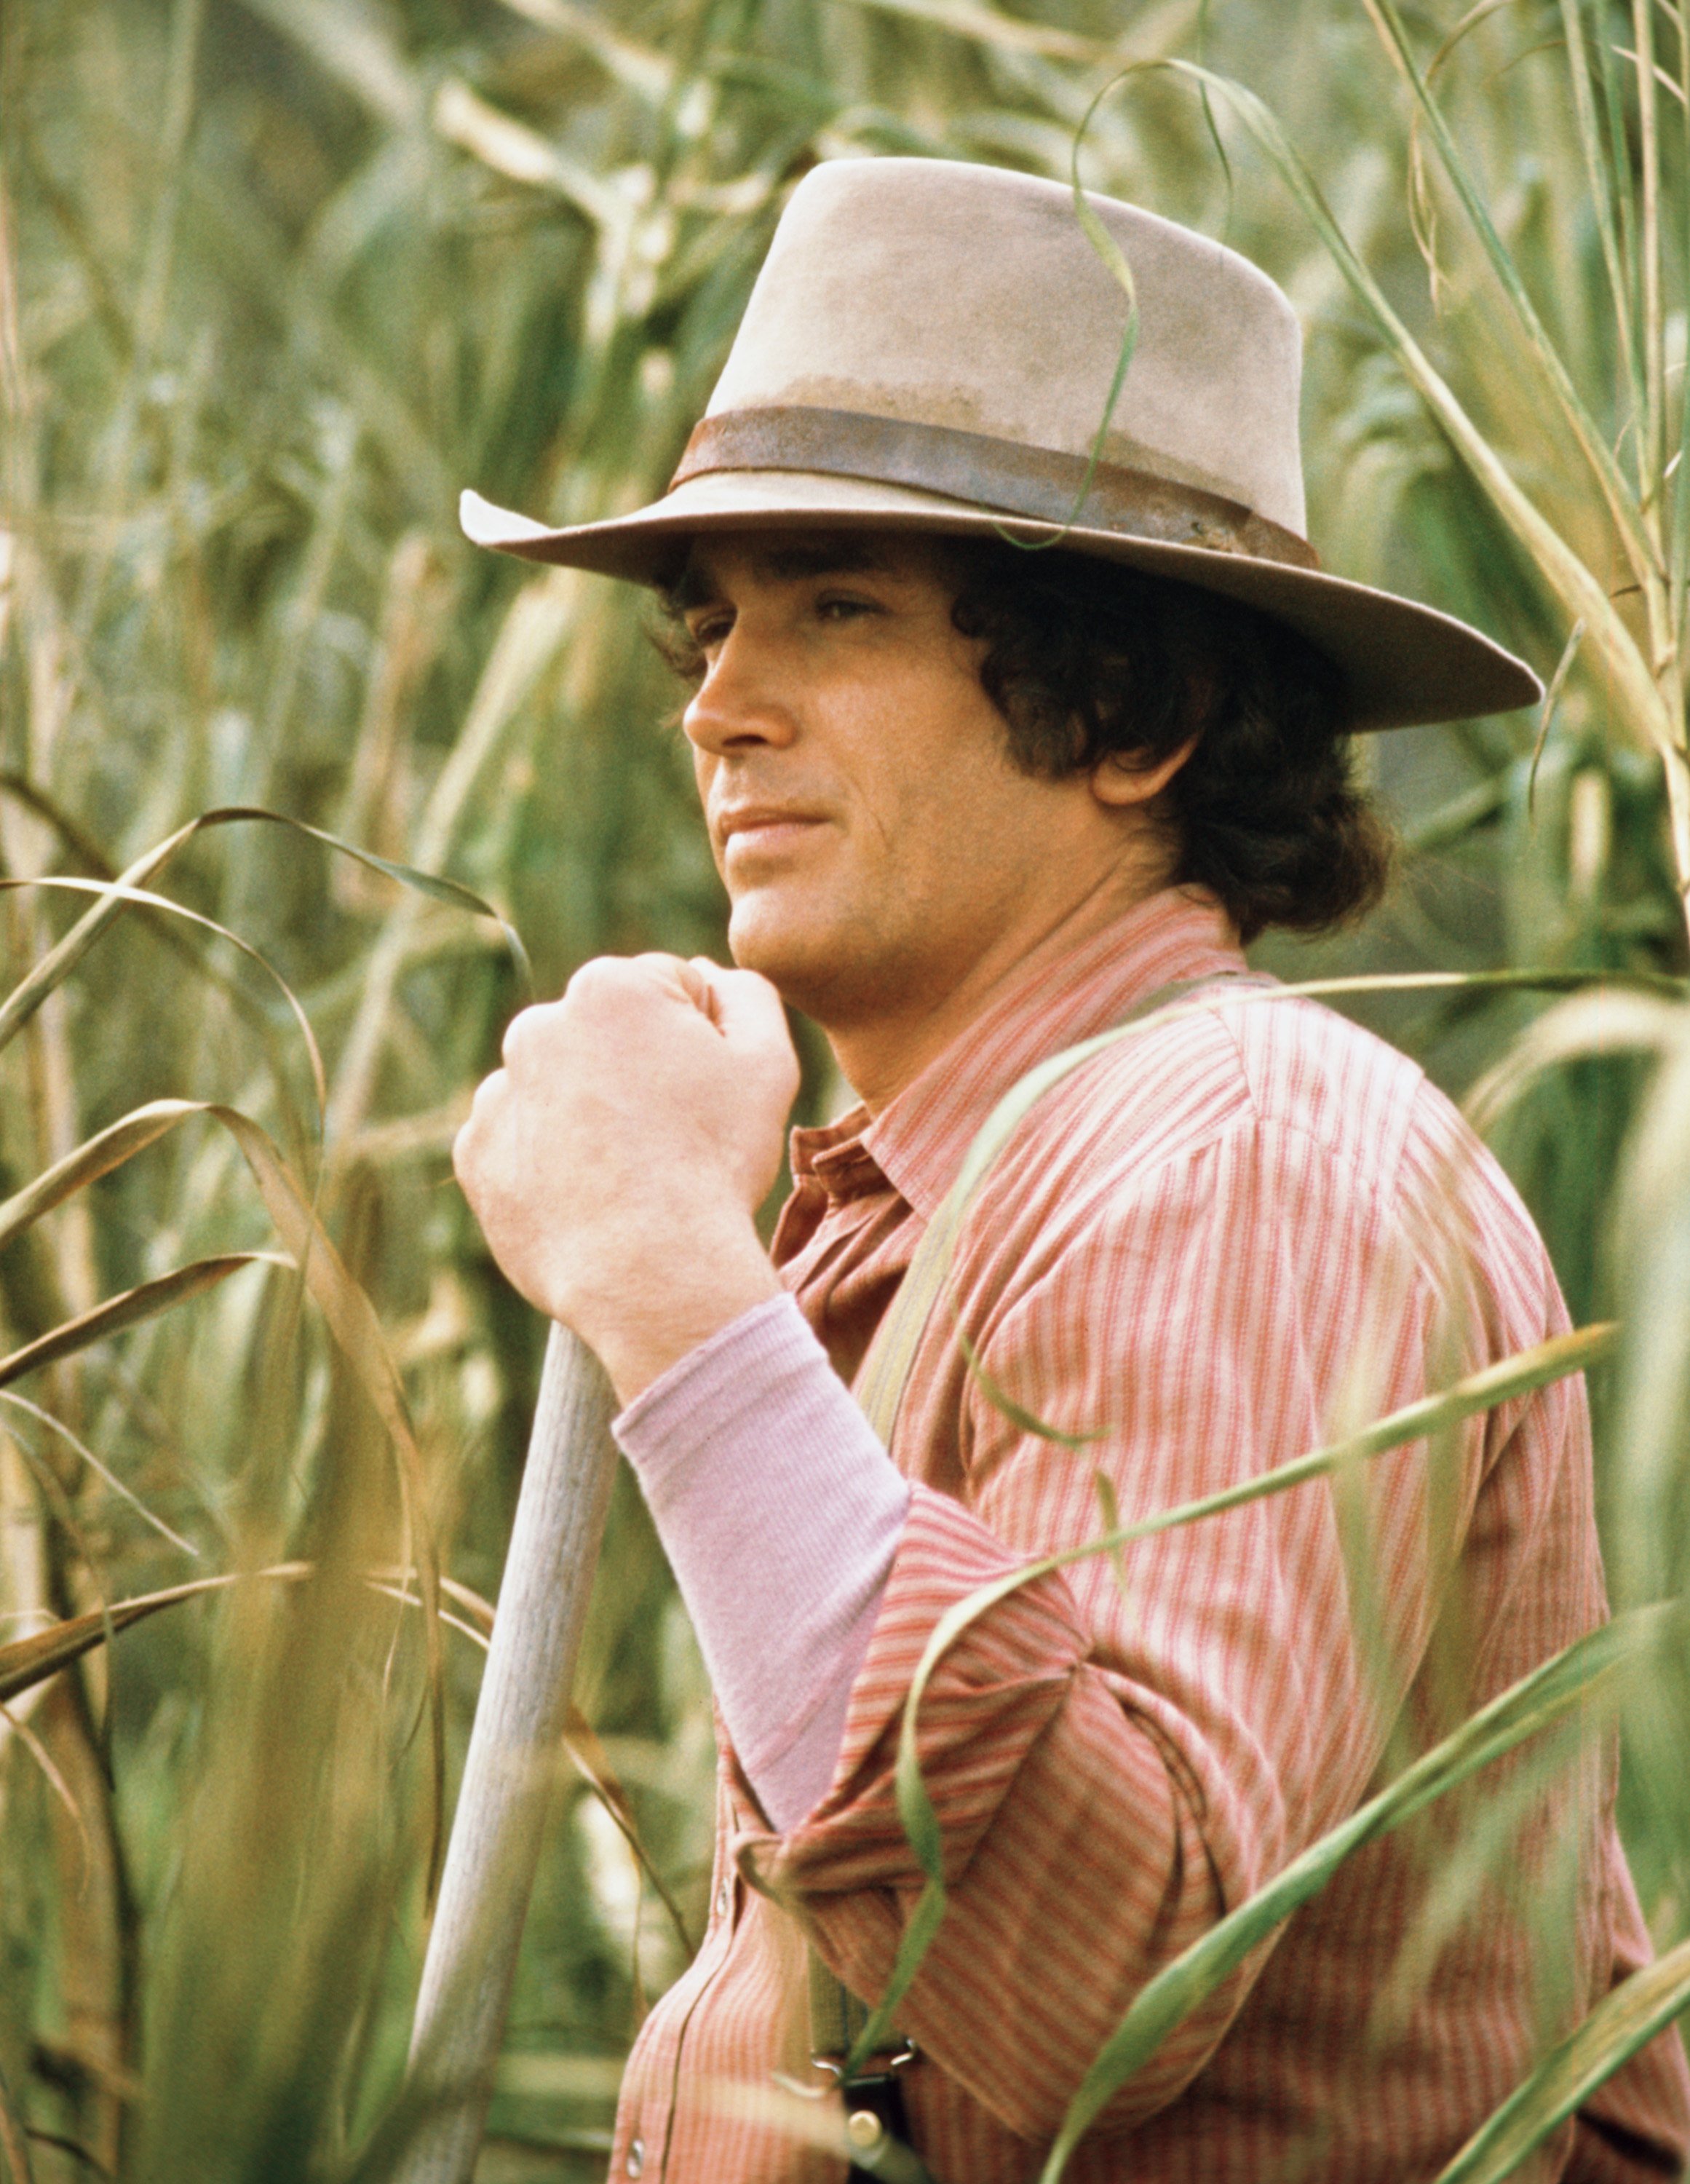 Filmmaker Michael Landon as Charles Philip Ingalls on the pilot of " Little House on the Prairie," aired on March 30, 1974. / Source: Getty Images